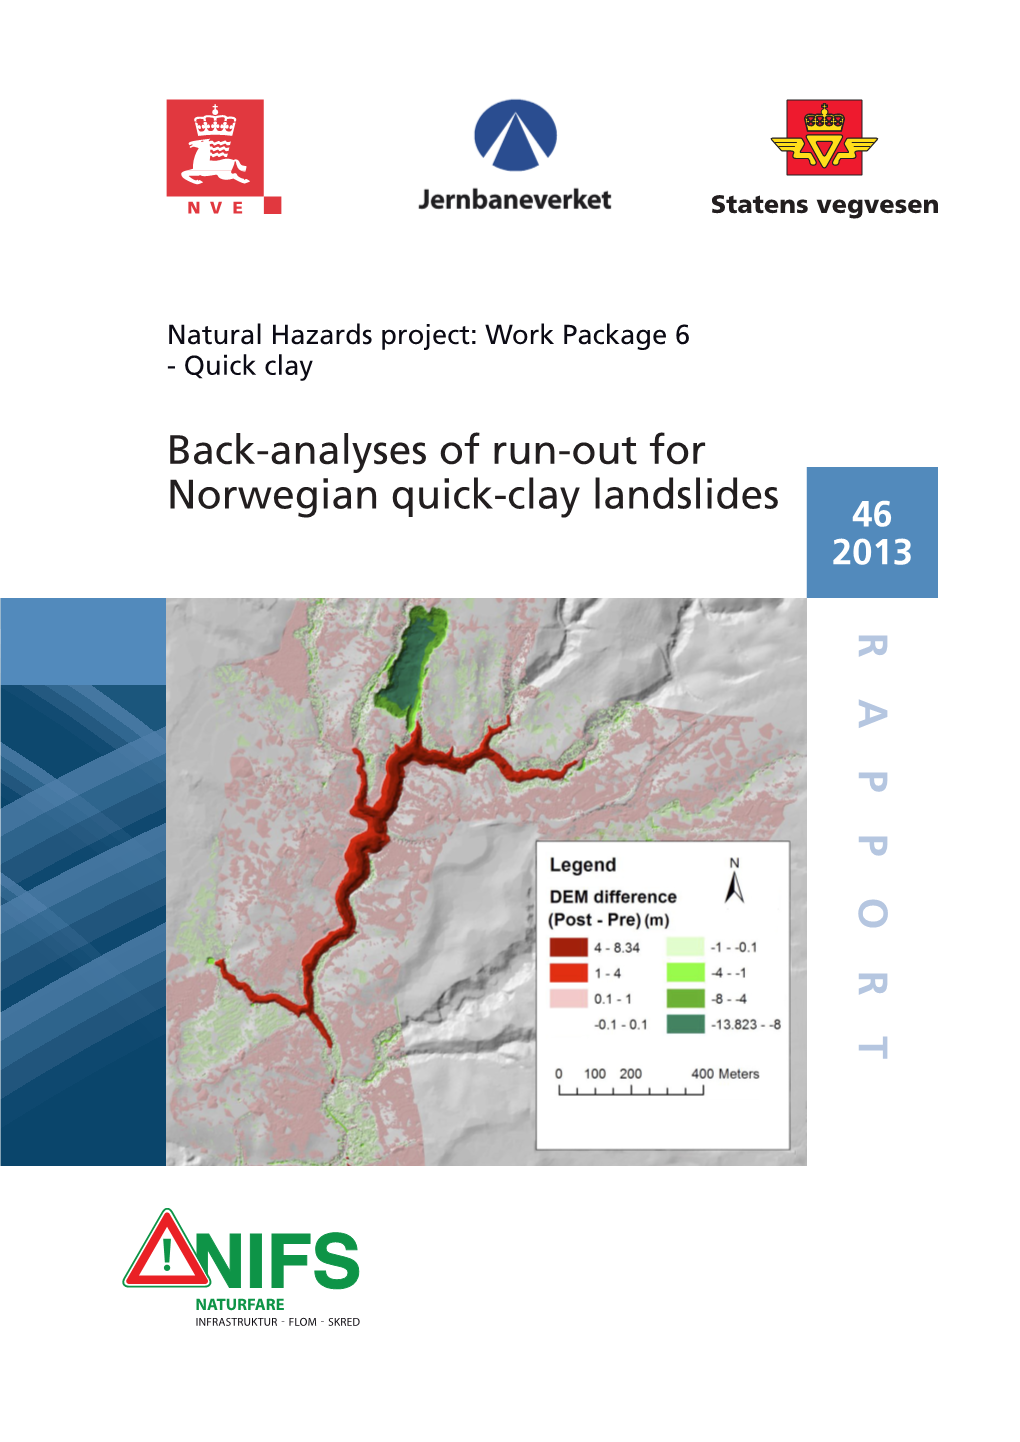 Back-Analyses of Run-Out for Norwegian Quick-Clay Landslides